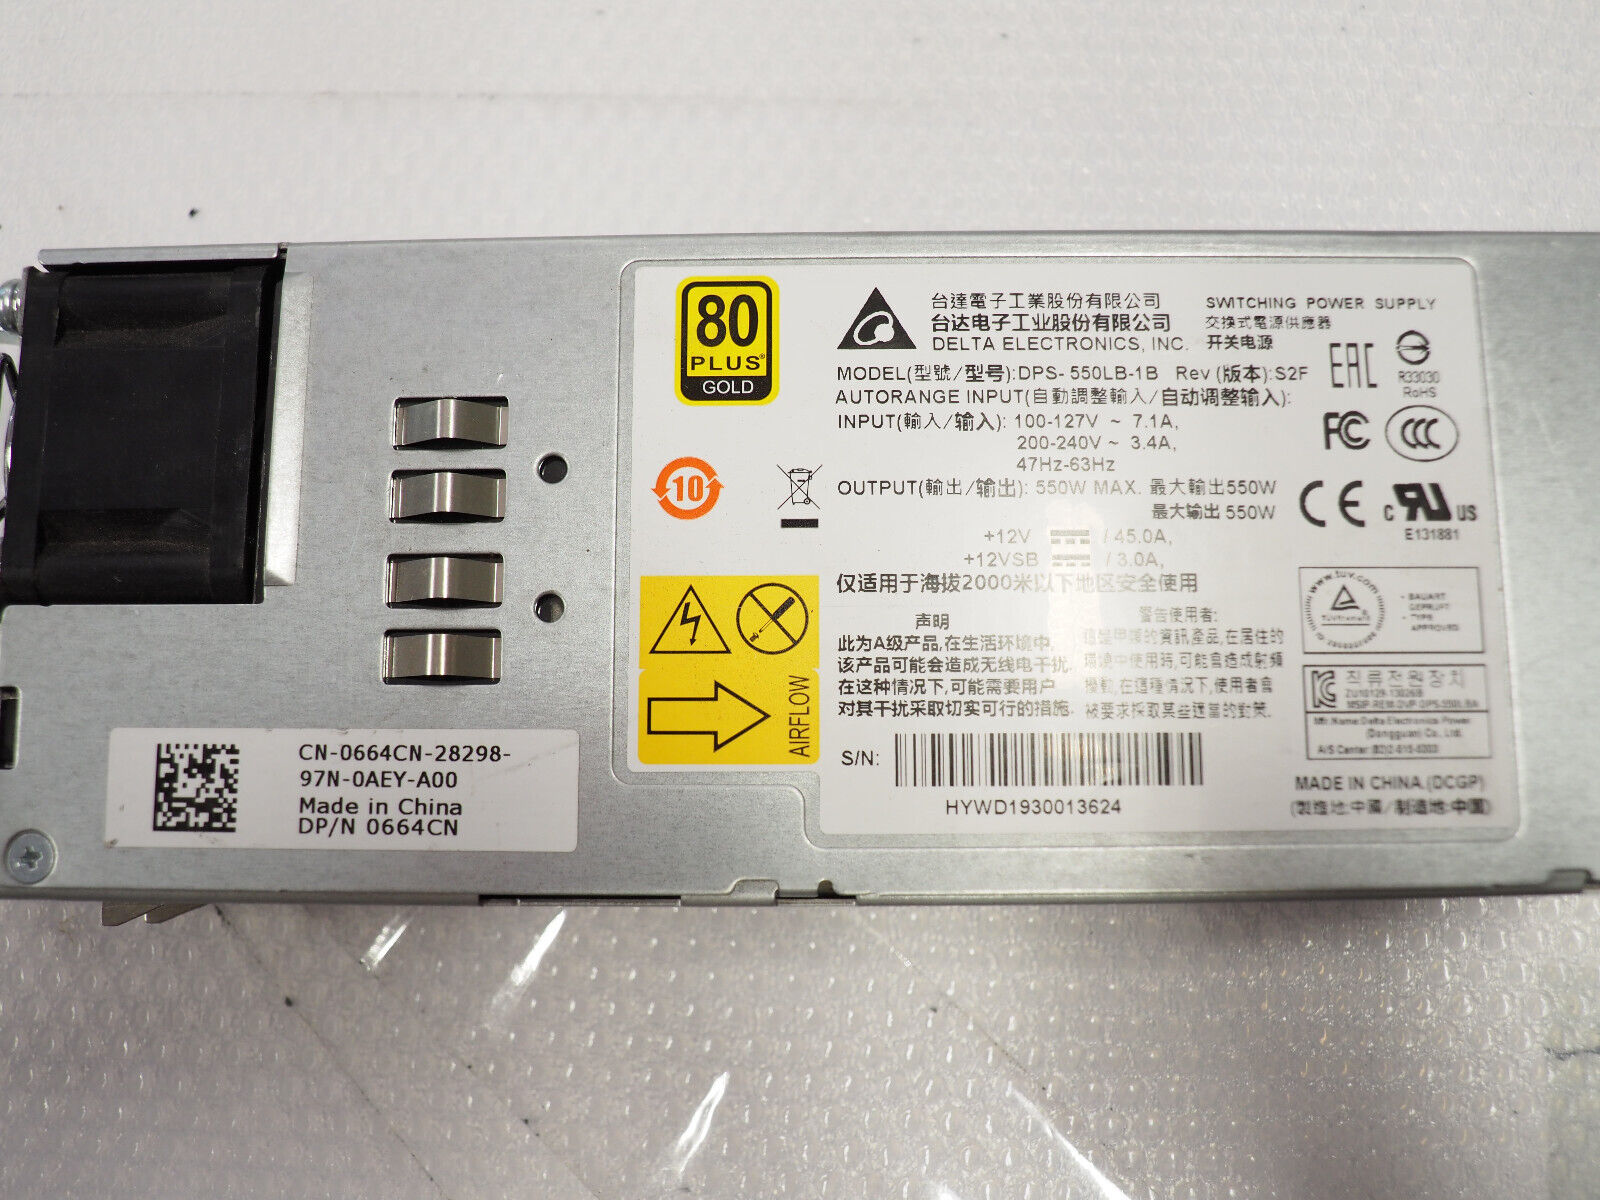 DELL DELTA DPS-550LB-1B 664CN 550W Switching Power Supply Module